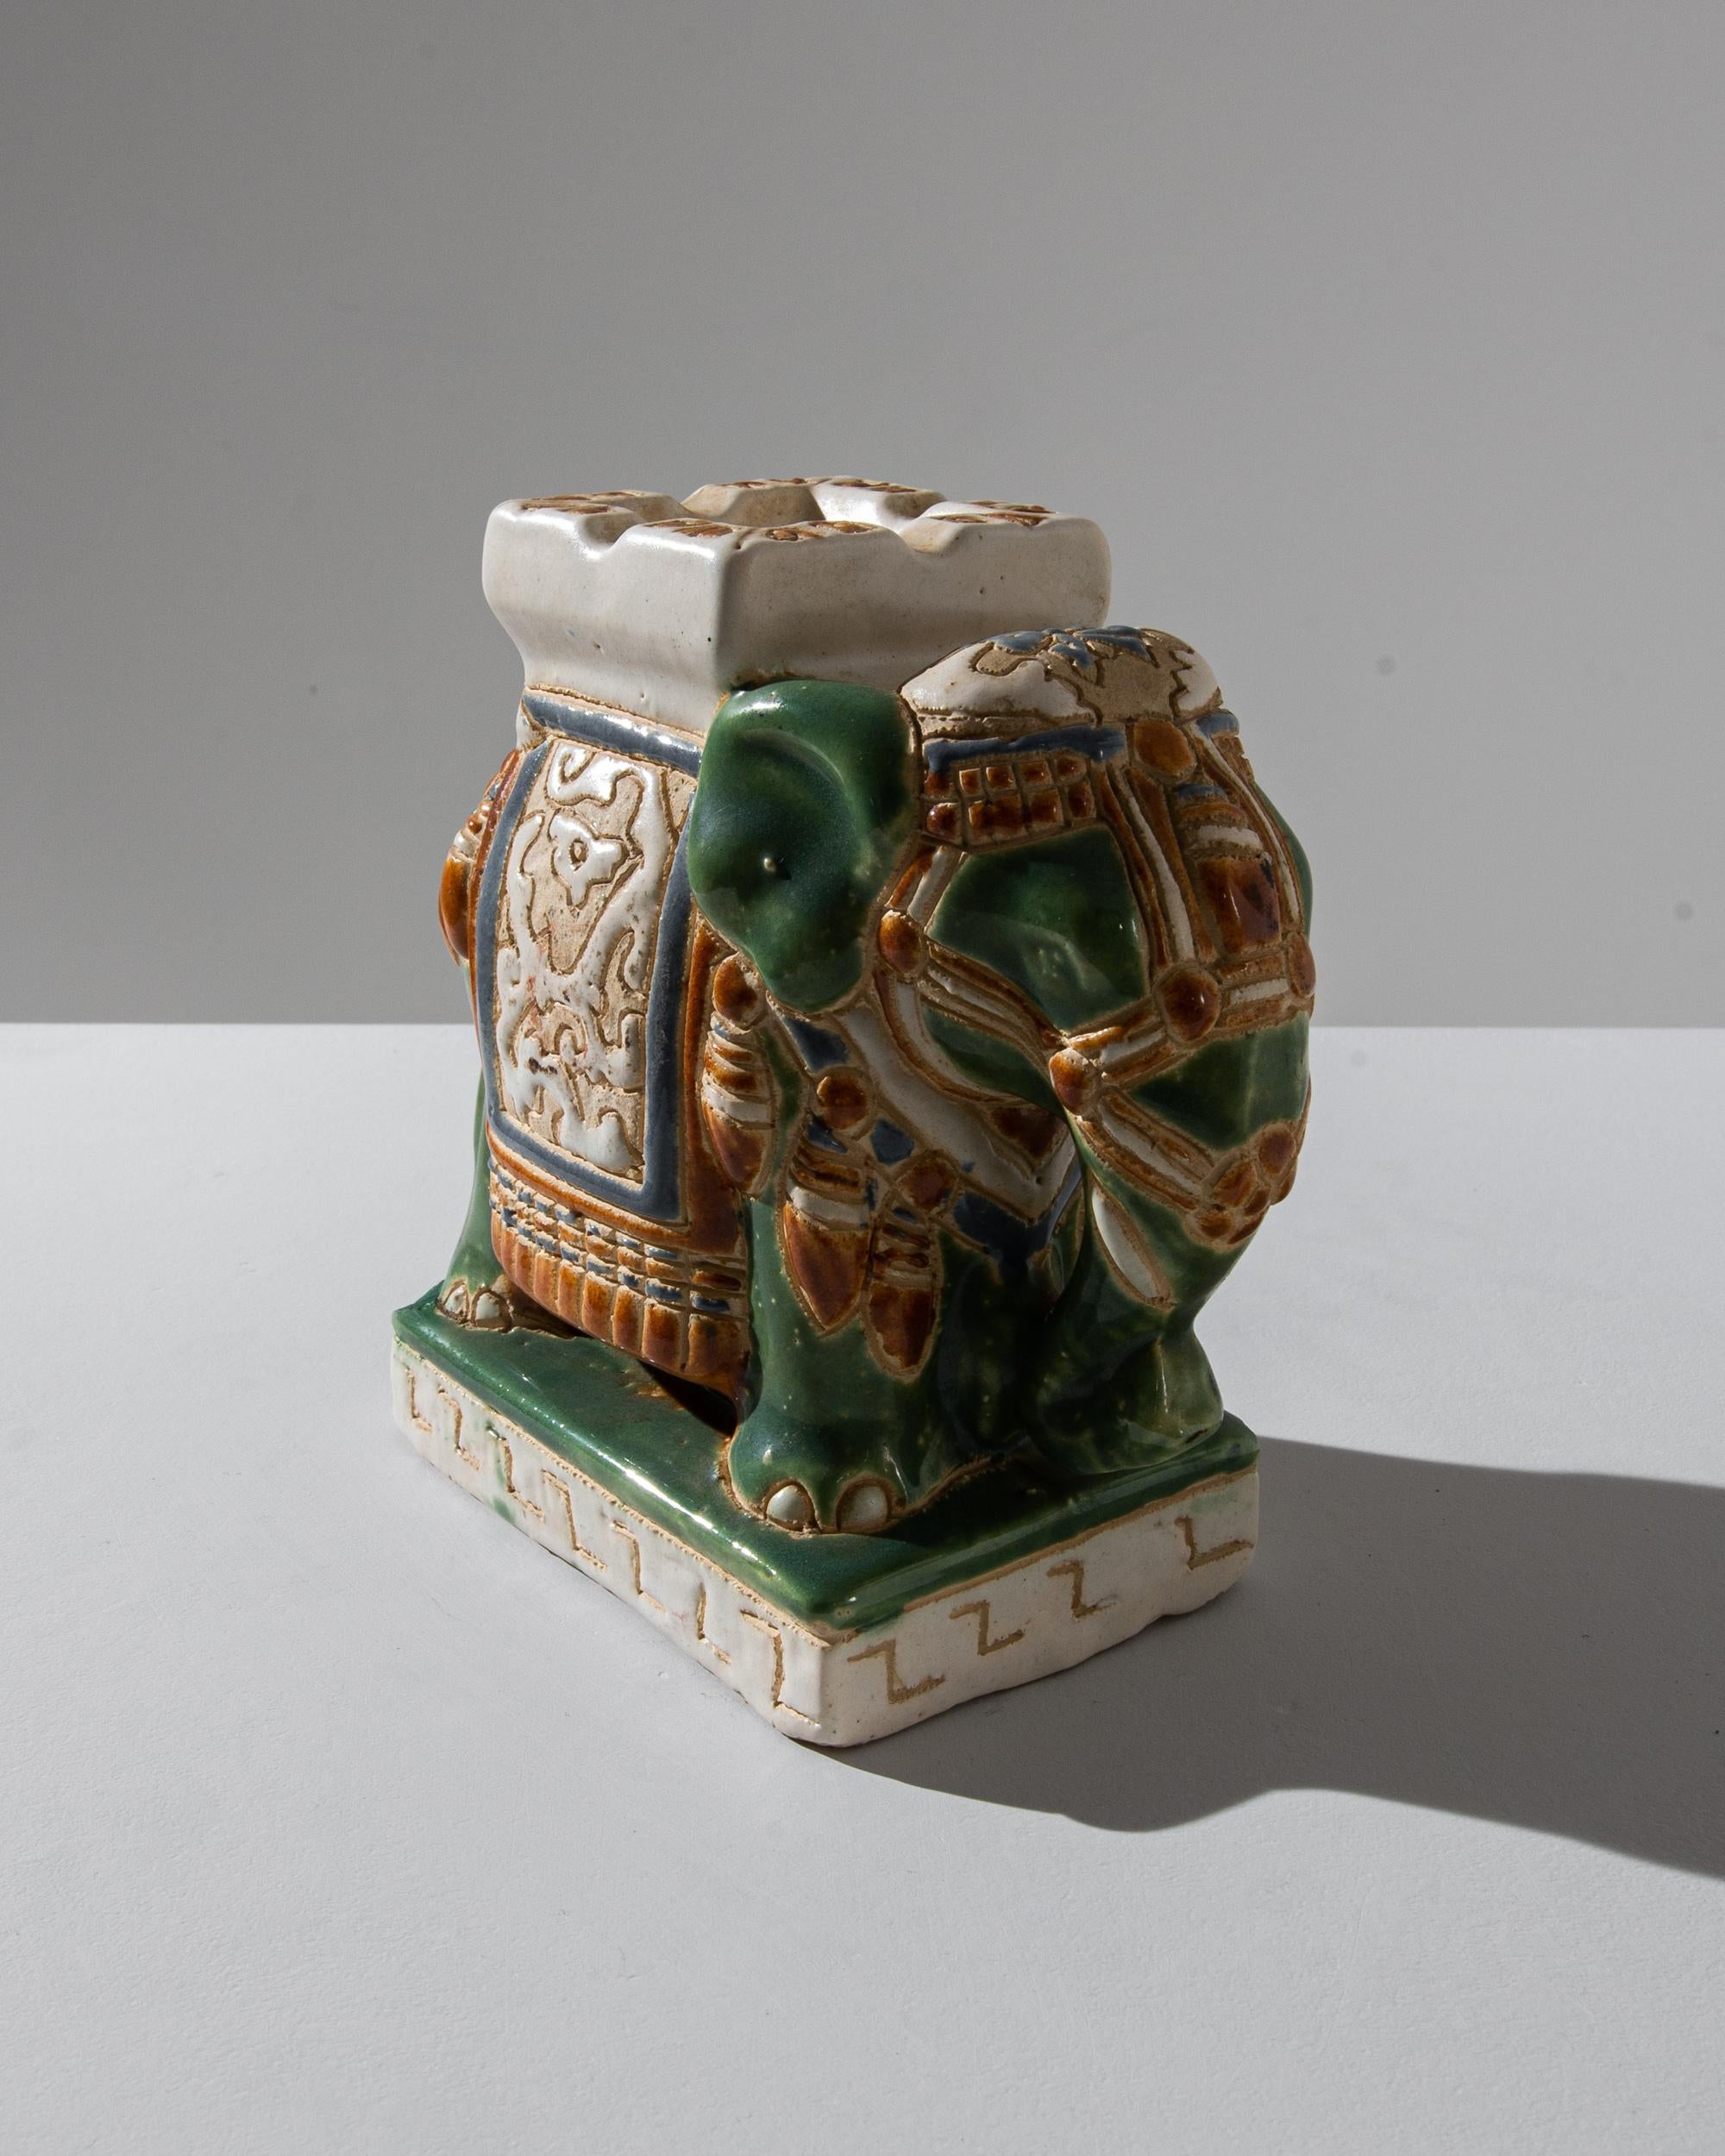 A ceramic decoration from 1960s France in the shape of an elephant. A saddle seat and blanket are glazed with celadon hues, laced with powder blue and a wash of yellow ochre; the assortment of delicate patterns — reflecting Chinese and Arabic